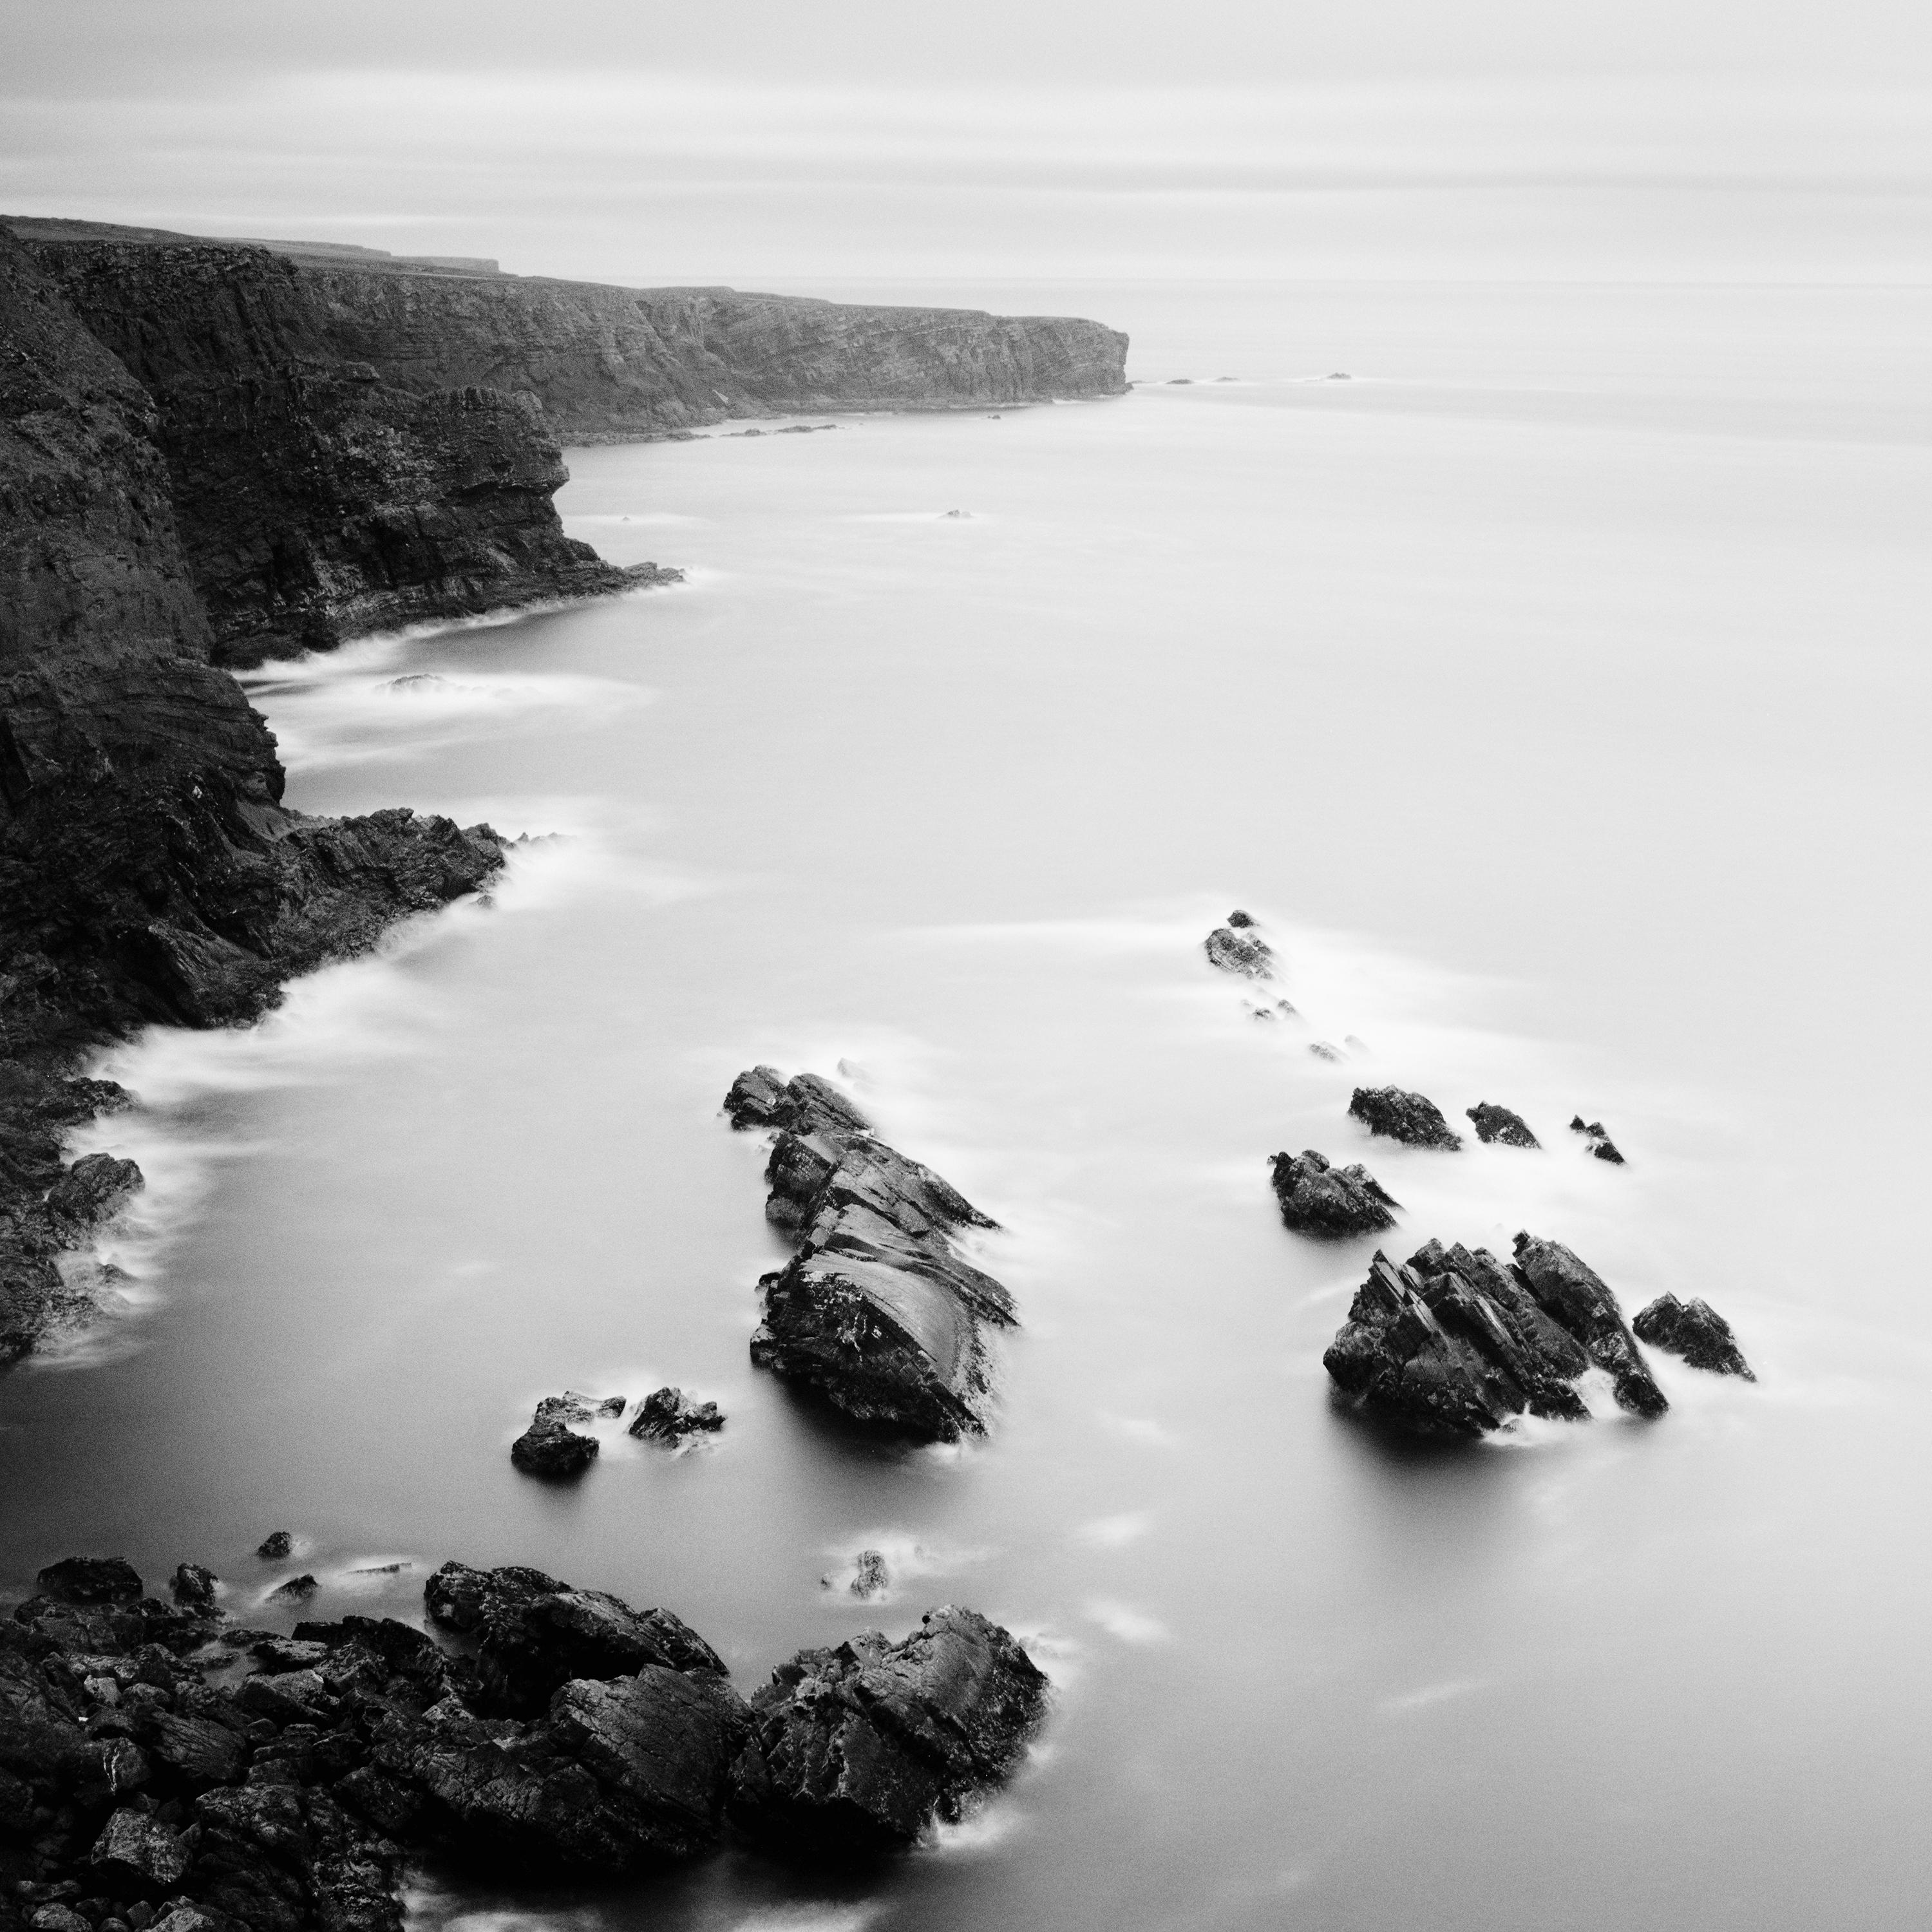 Black and white fine art long exposure seascape - landscape photography. Ireland's wild cliffs during a storm. Archival pigment ink print, edition of 9. Signed, titled, dated and numbered by artist. Certificate of authenticity included. Printed with